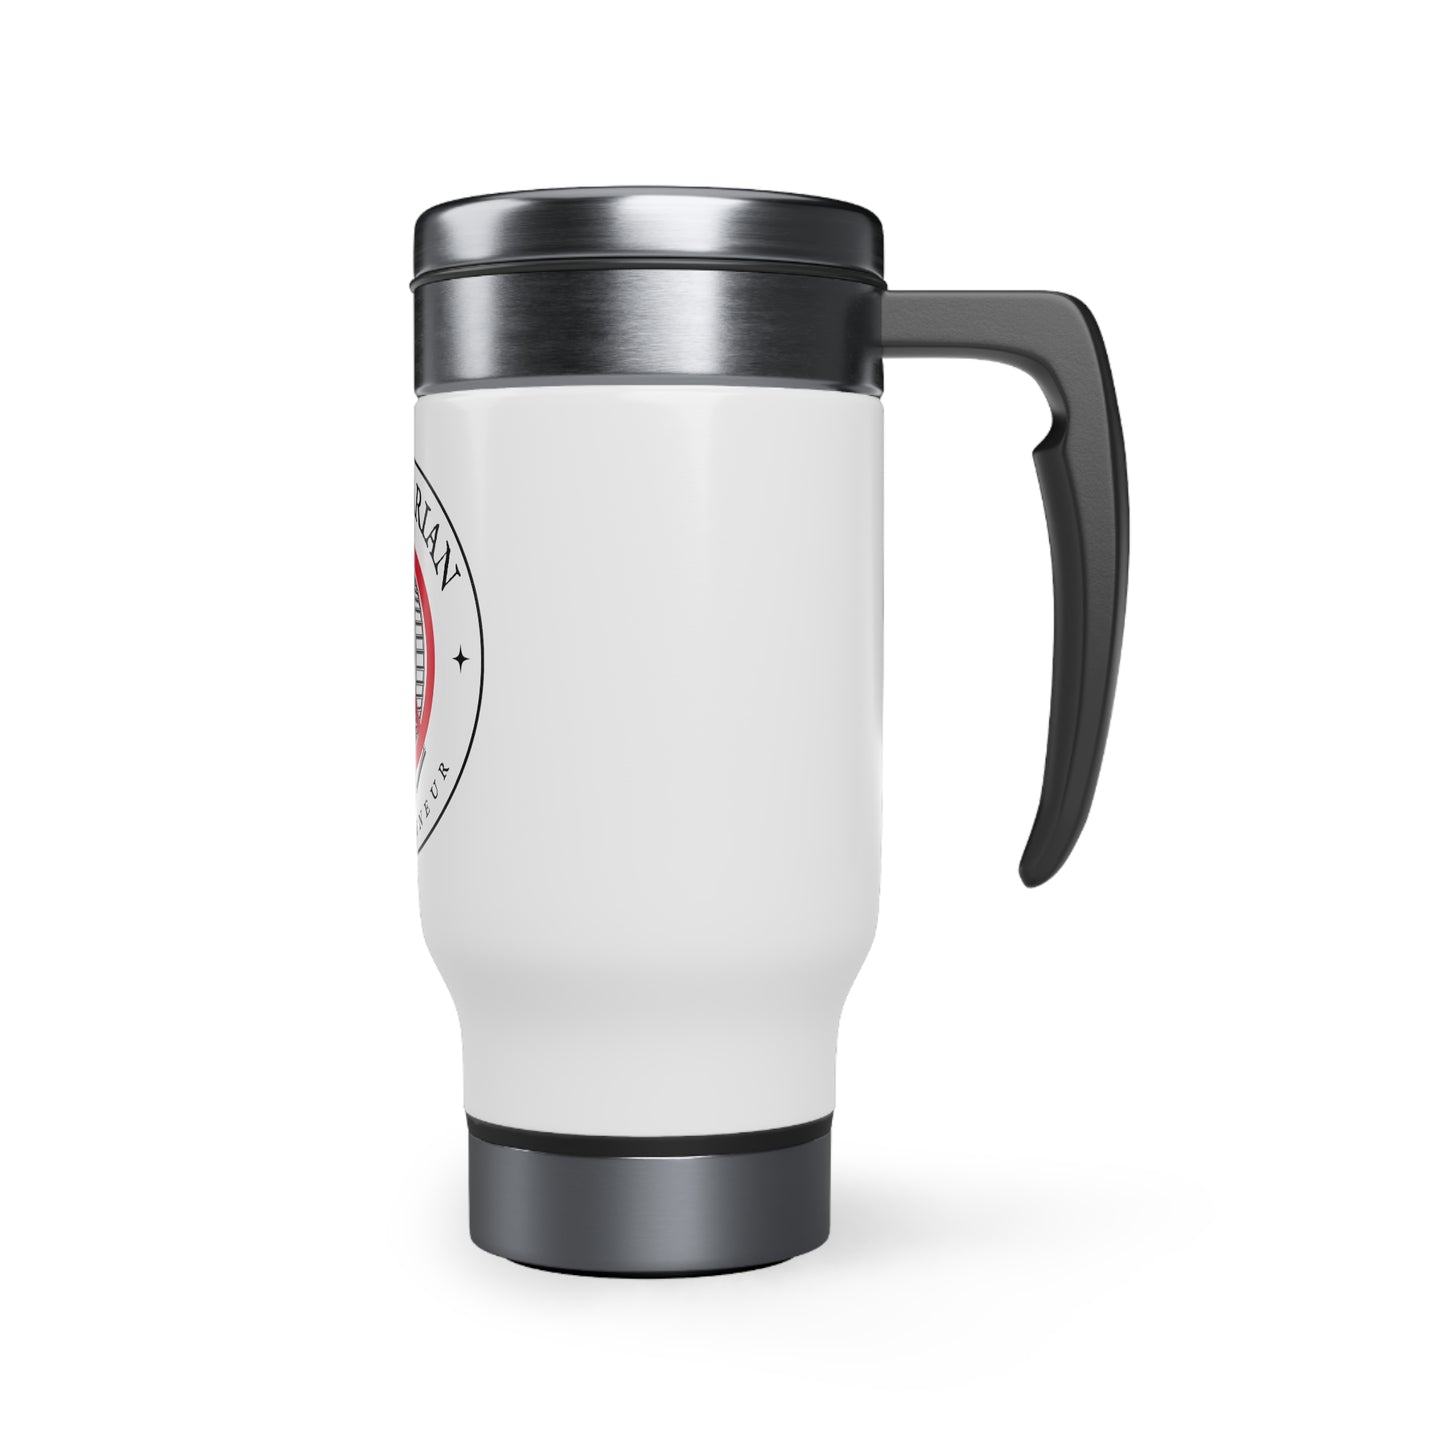 Contrarian Entrepreneur Stainless Steel Travel Mug with Handle, 14oz